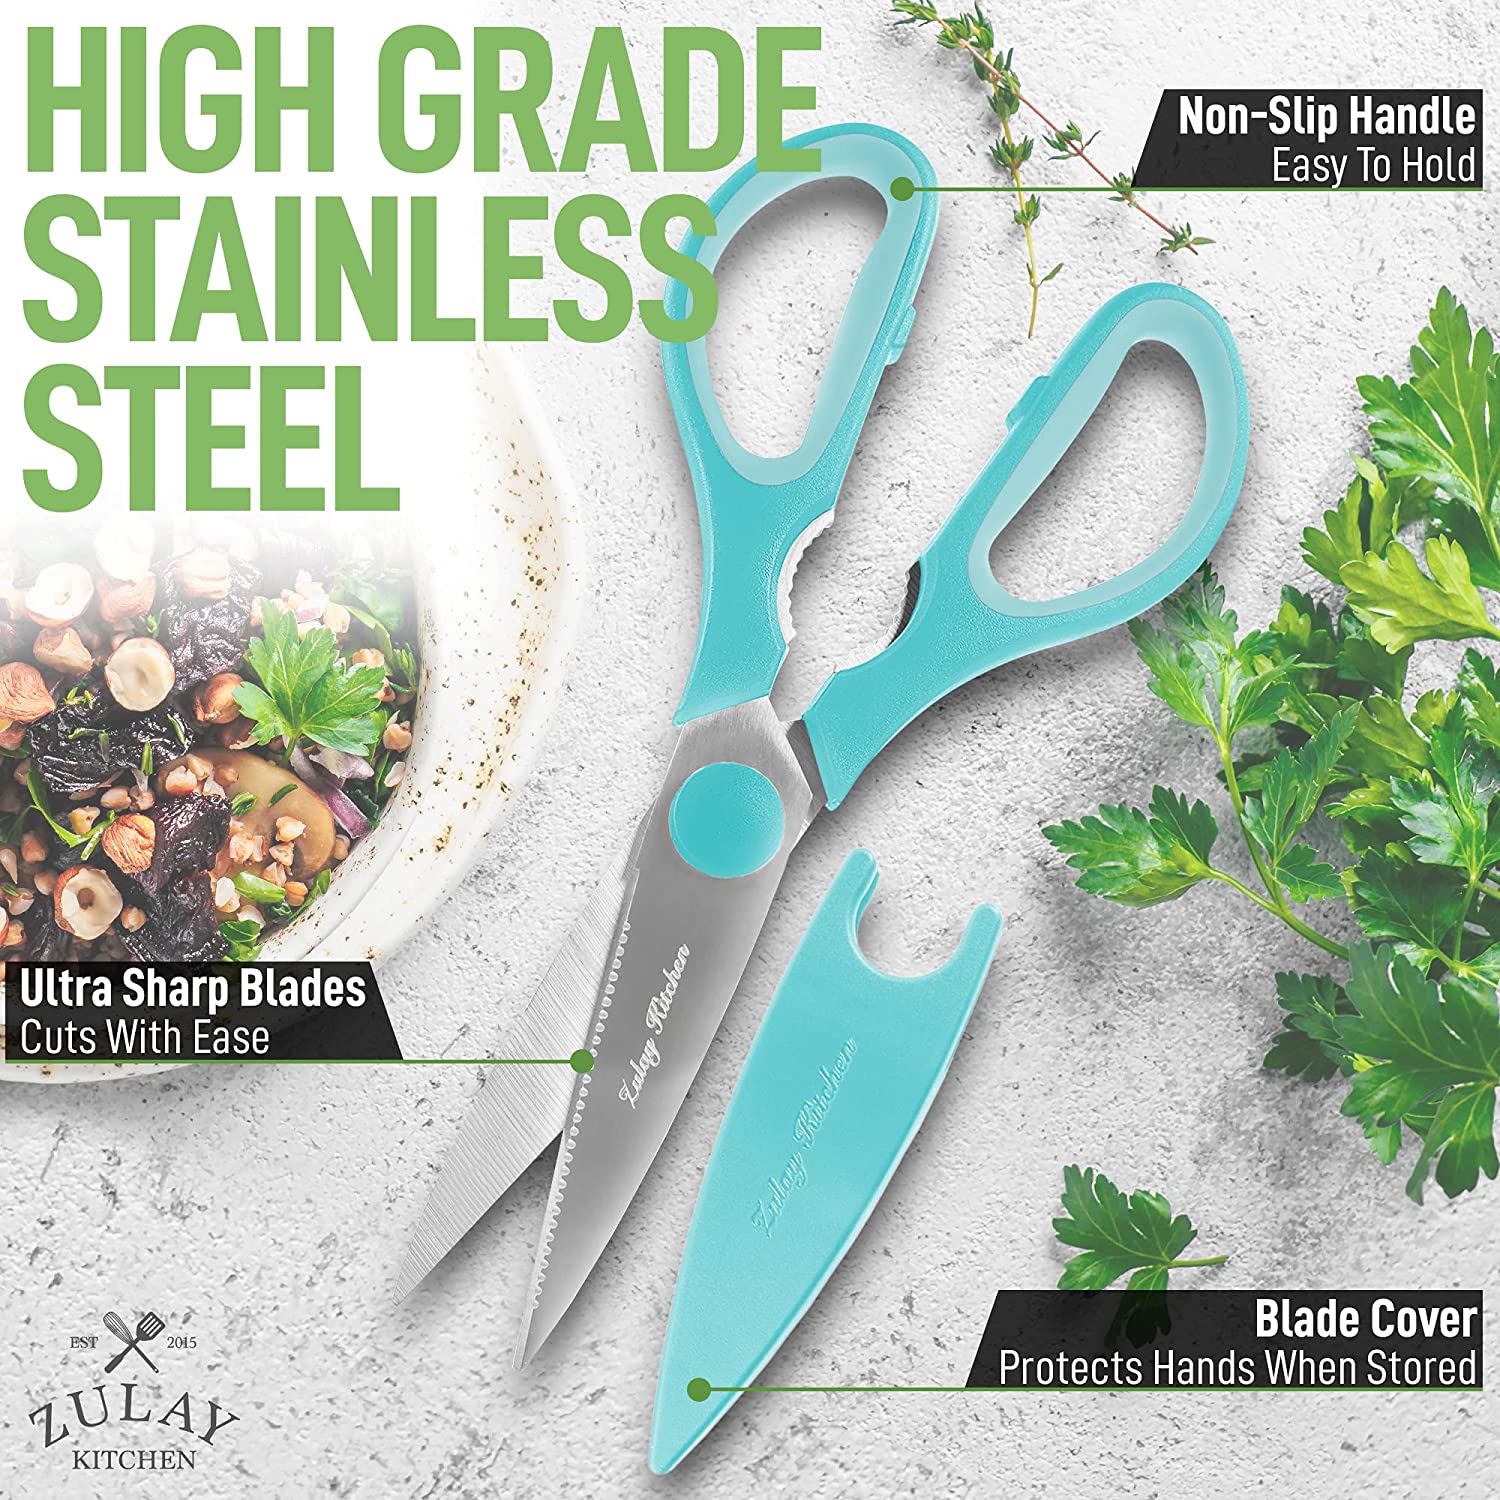 Stainless Steel Kitchen Shears With Protective Cover - Zulay KitchenZulay Kitchen